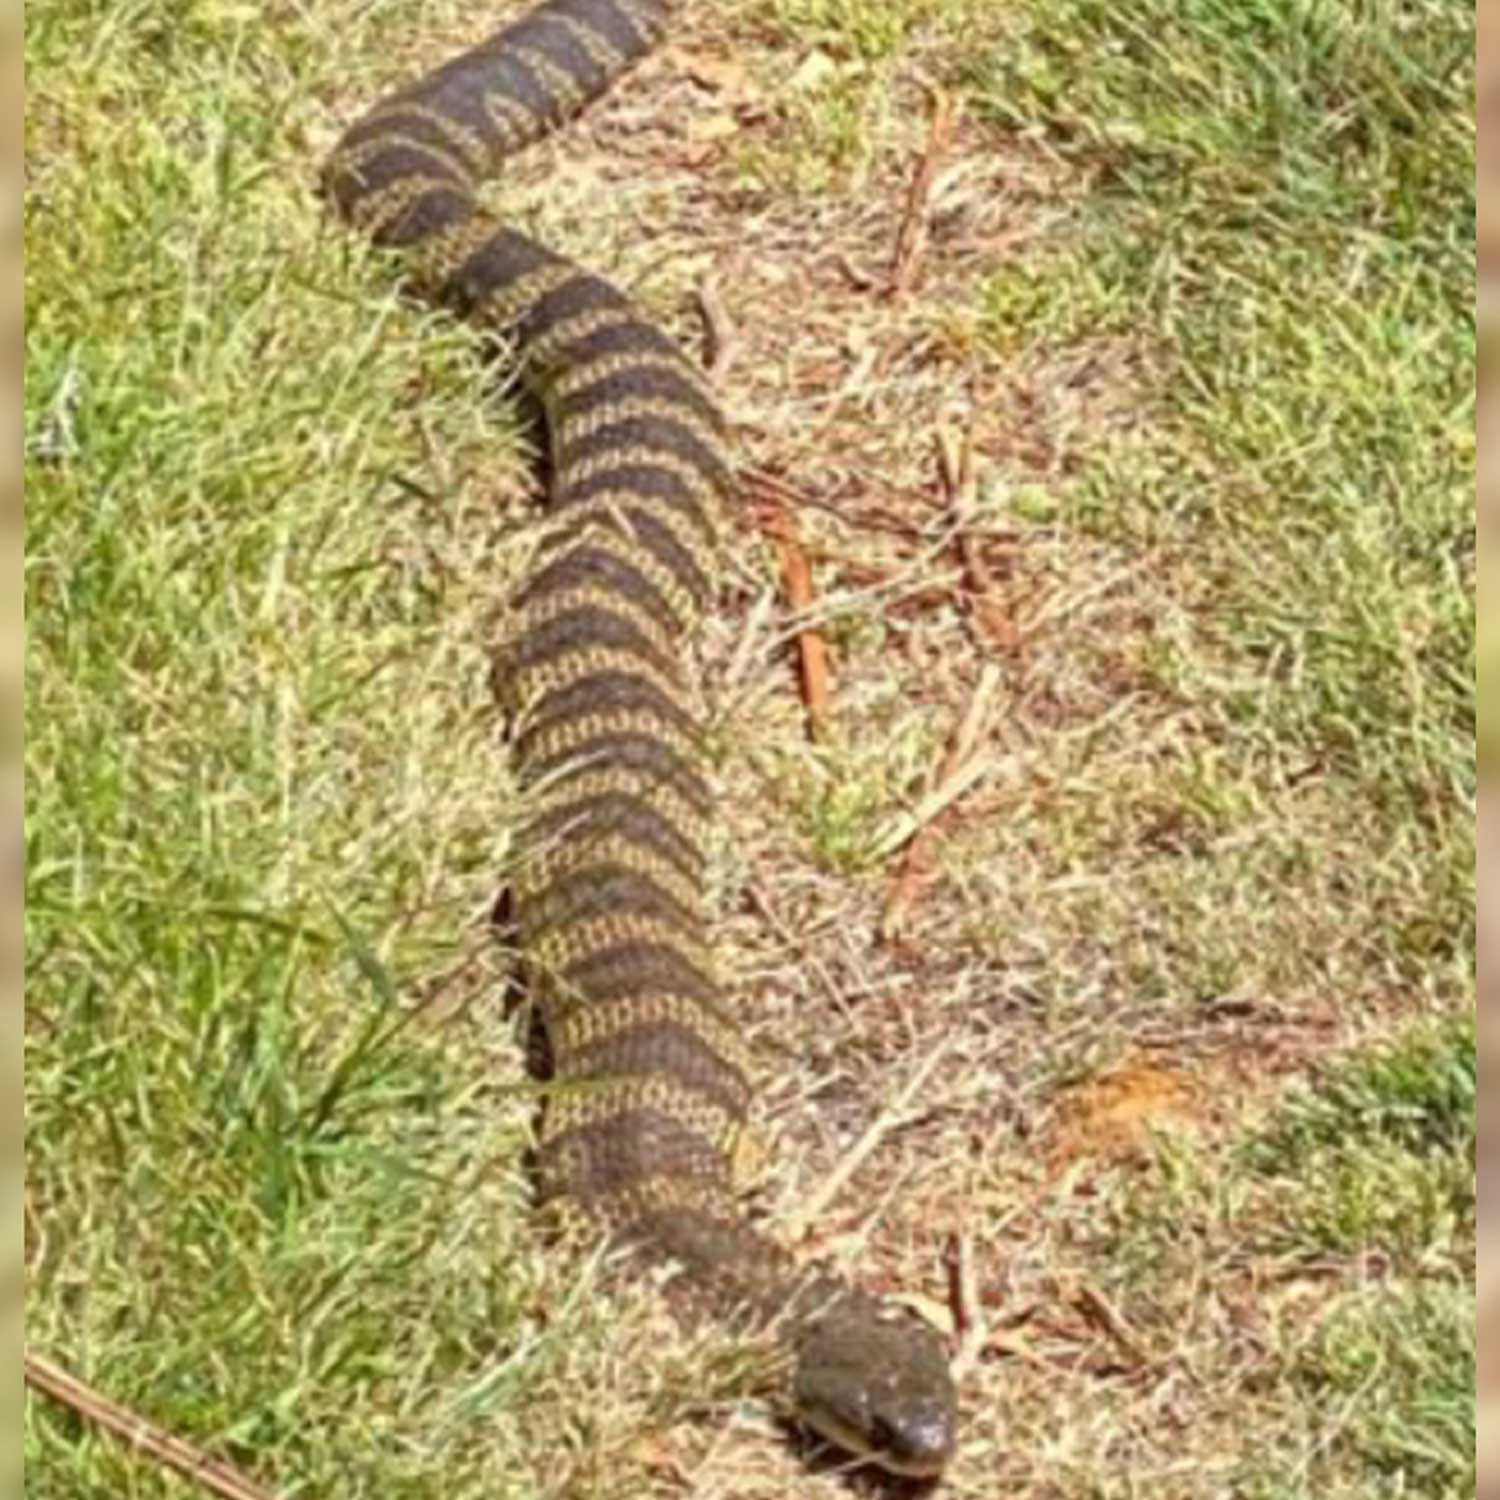 RUMOUR FILE: Huge Tiger Snake refuses to budge after over-indulging at lunch